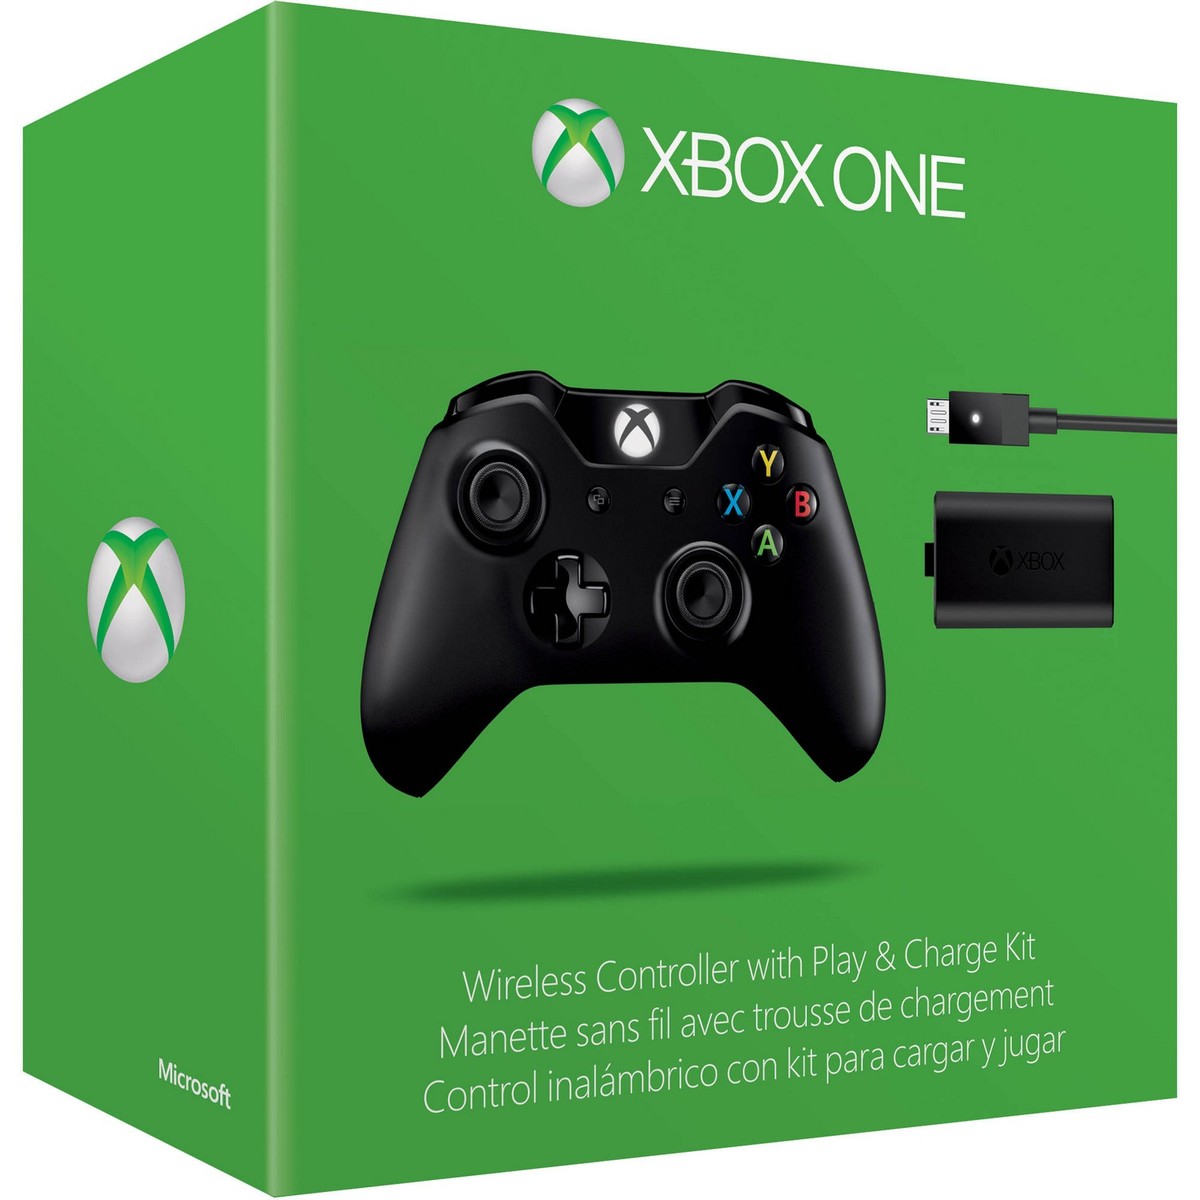 Xbox One Wireless Controller + Play & Charge Kit